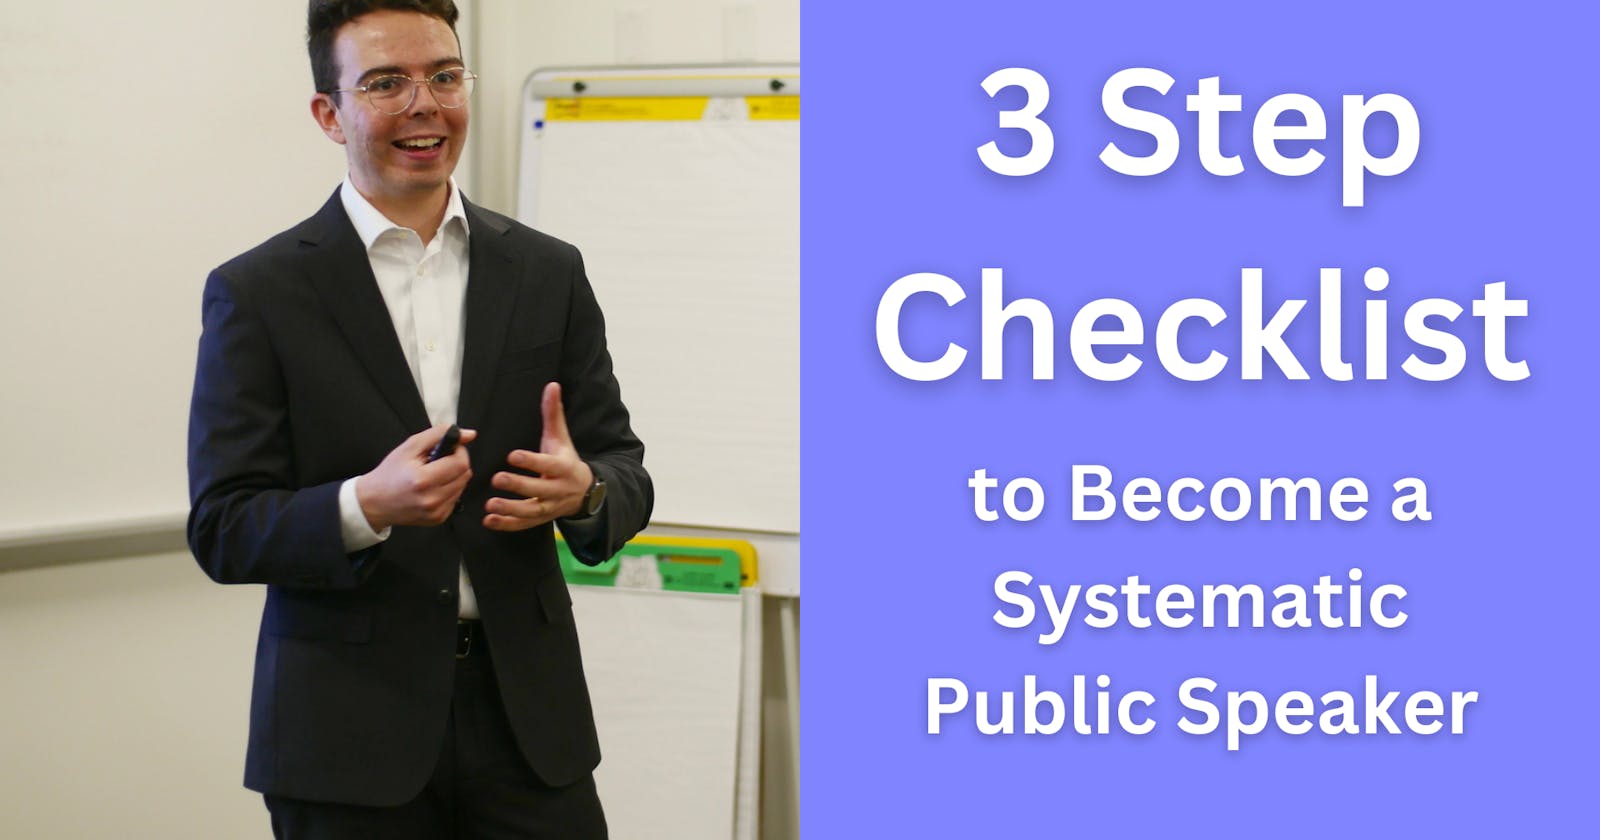 3 Step Checklist to Become a Systematic Public Speaker 🎤🎉